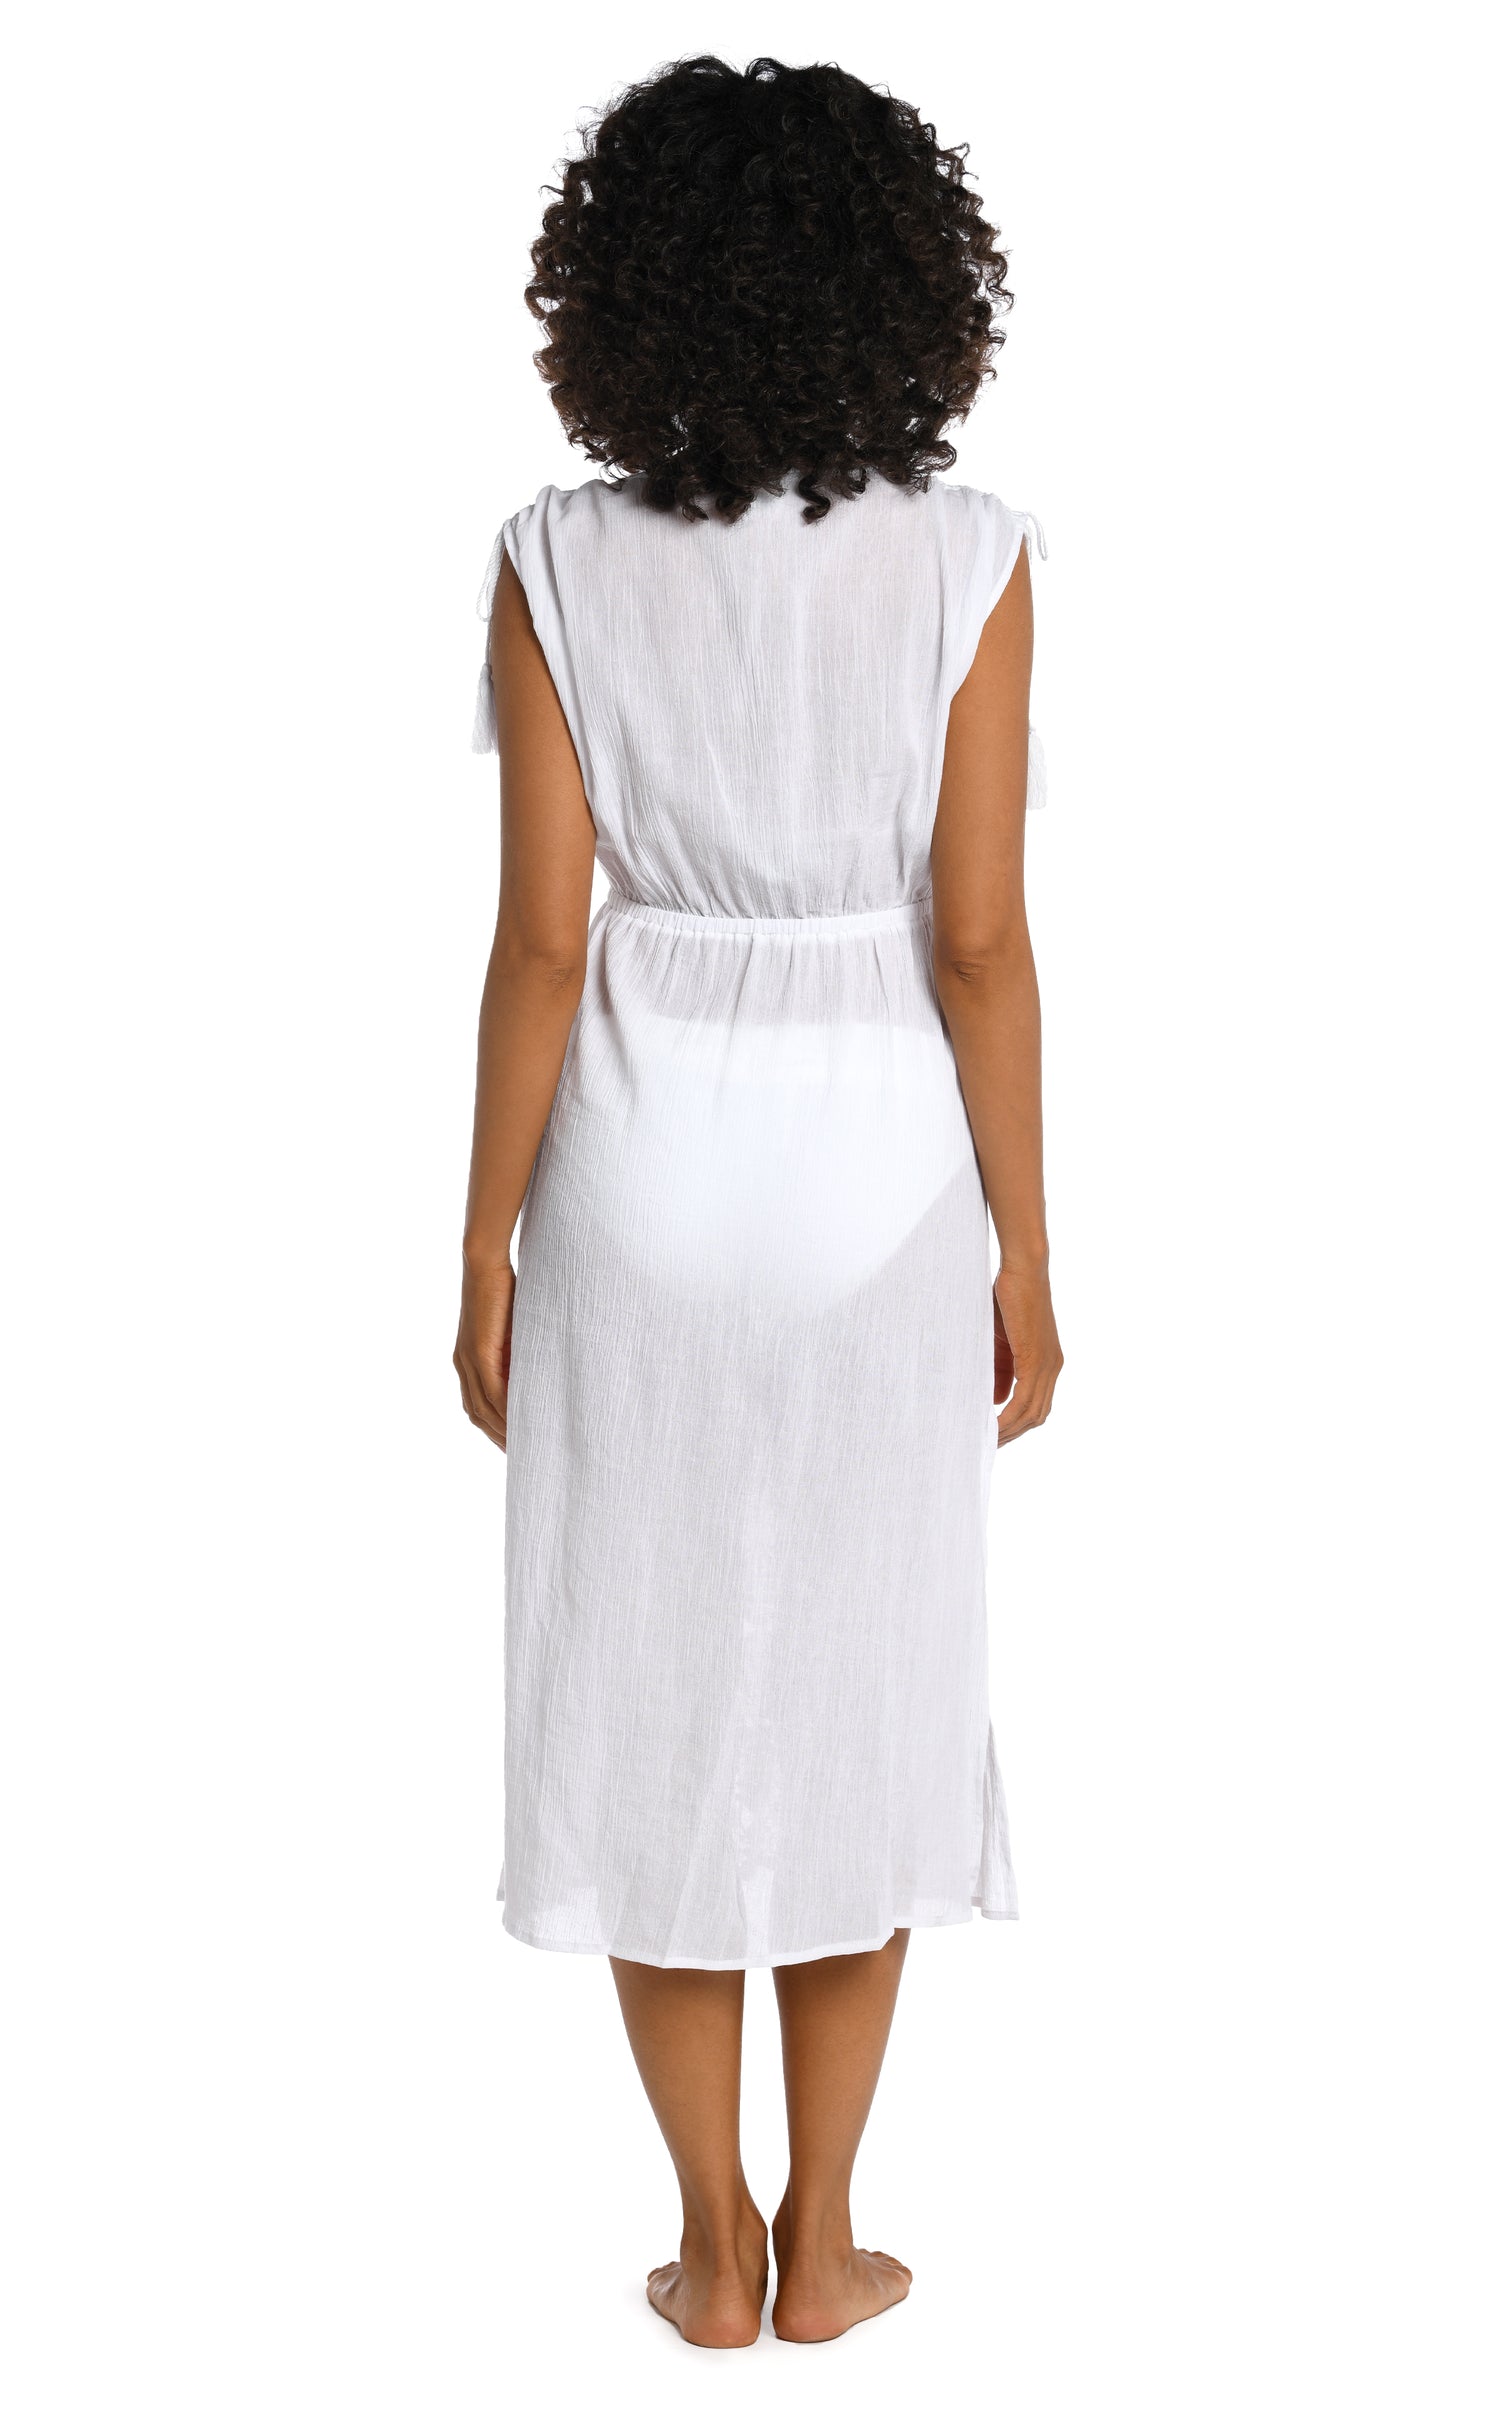 Model is wearing a white mid-length dress swimsuit cover up from our Island Fare collection.